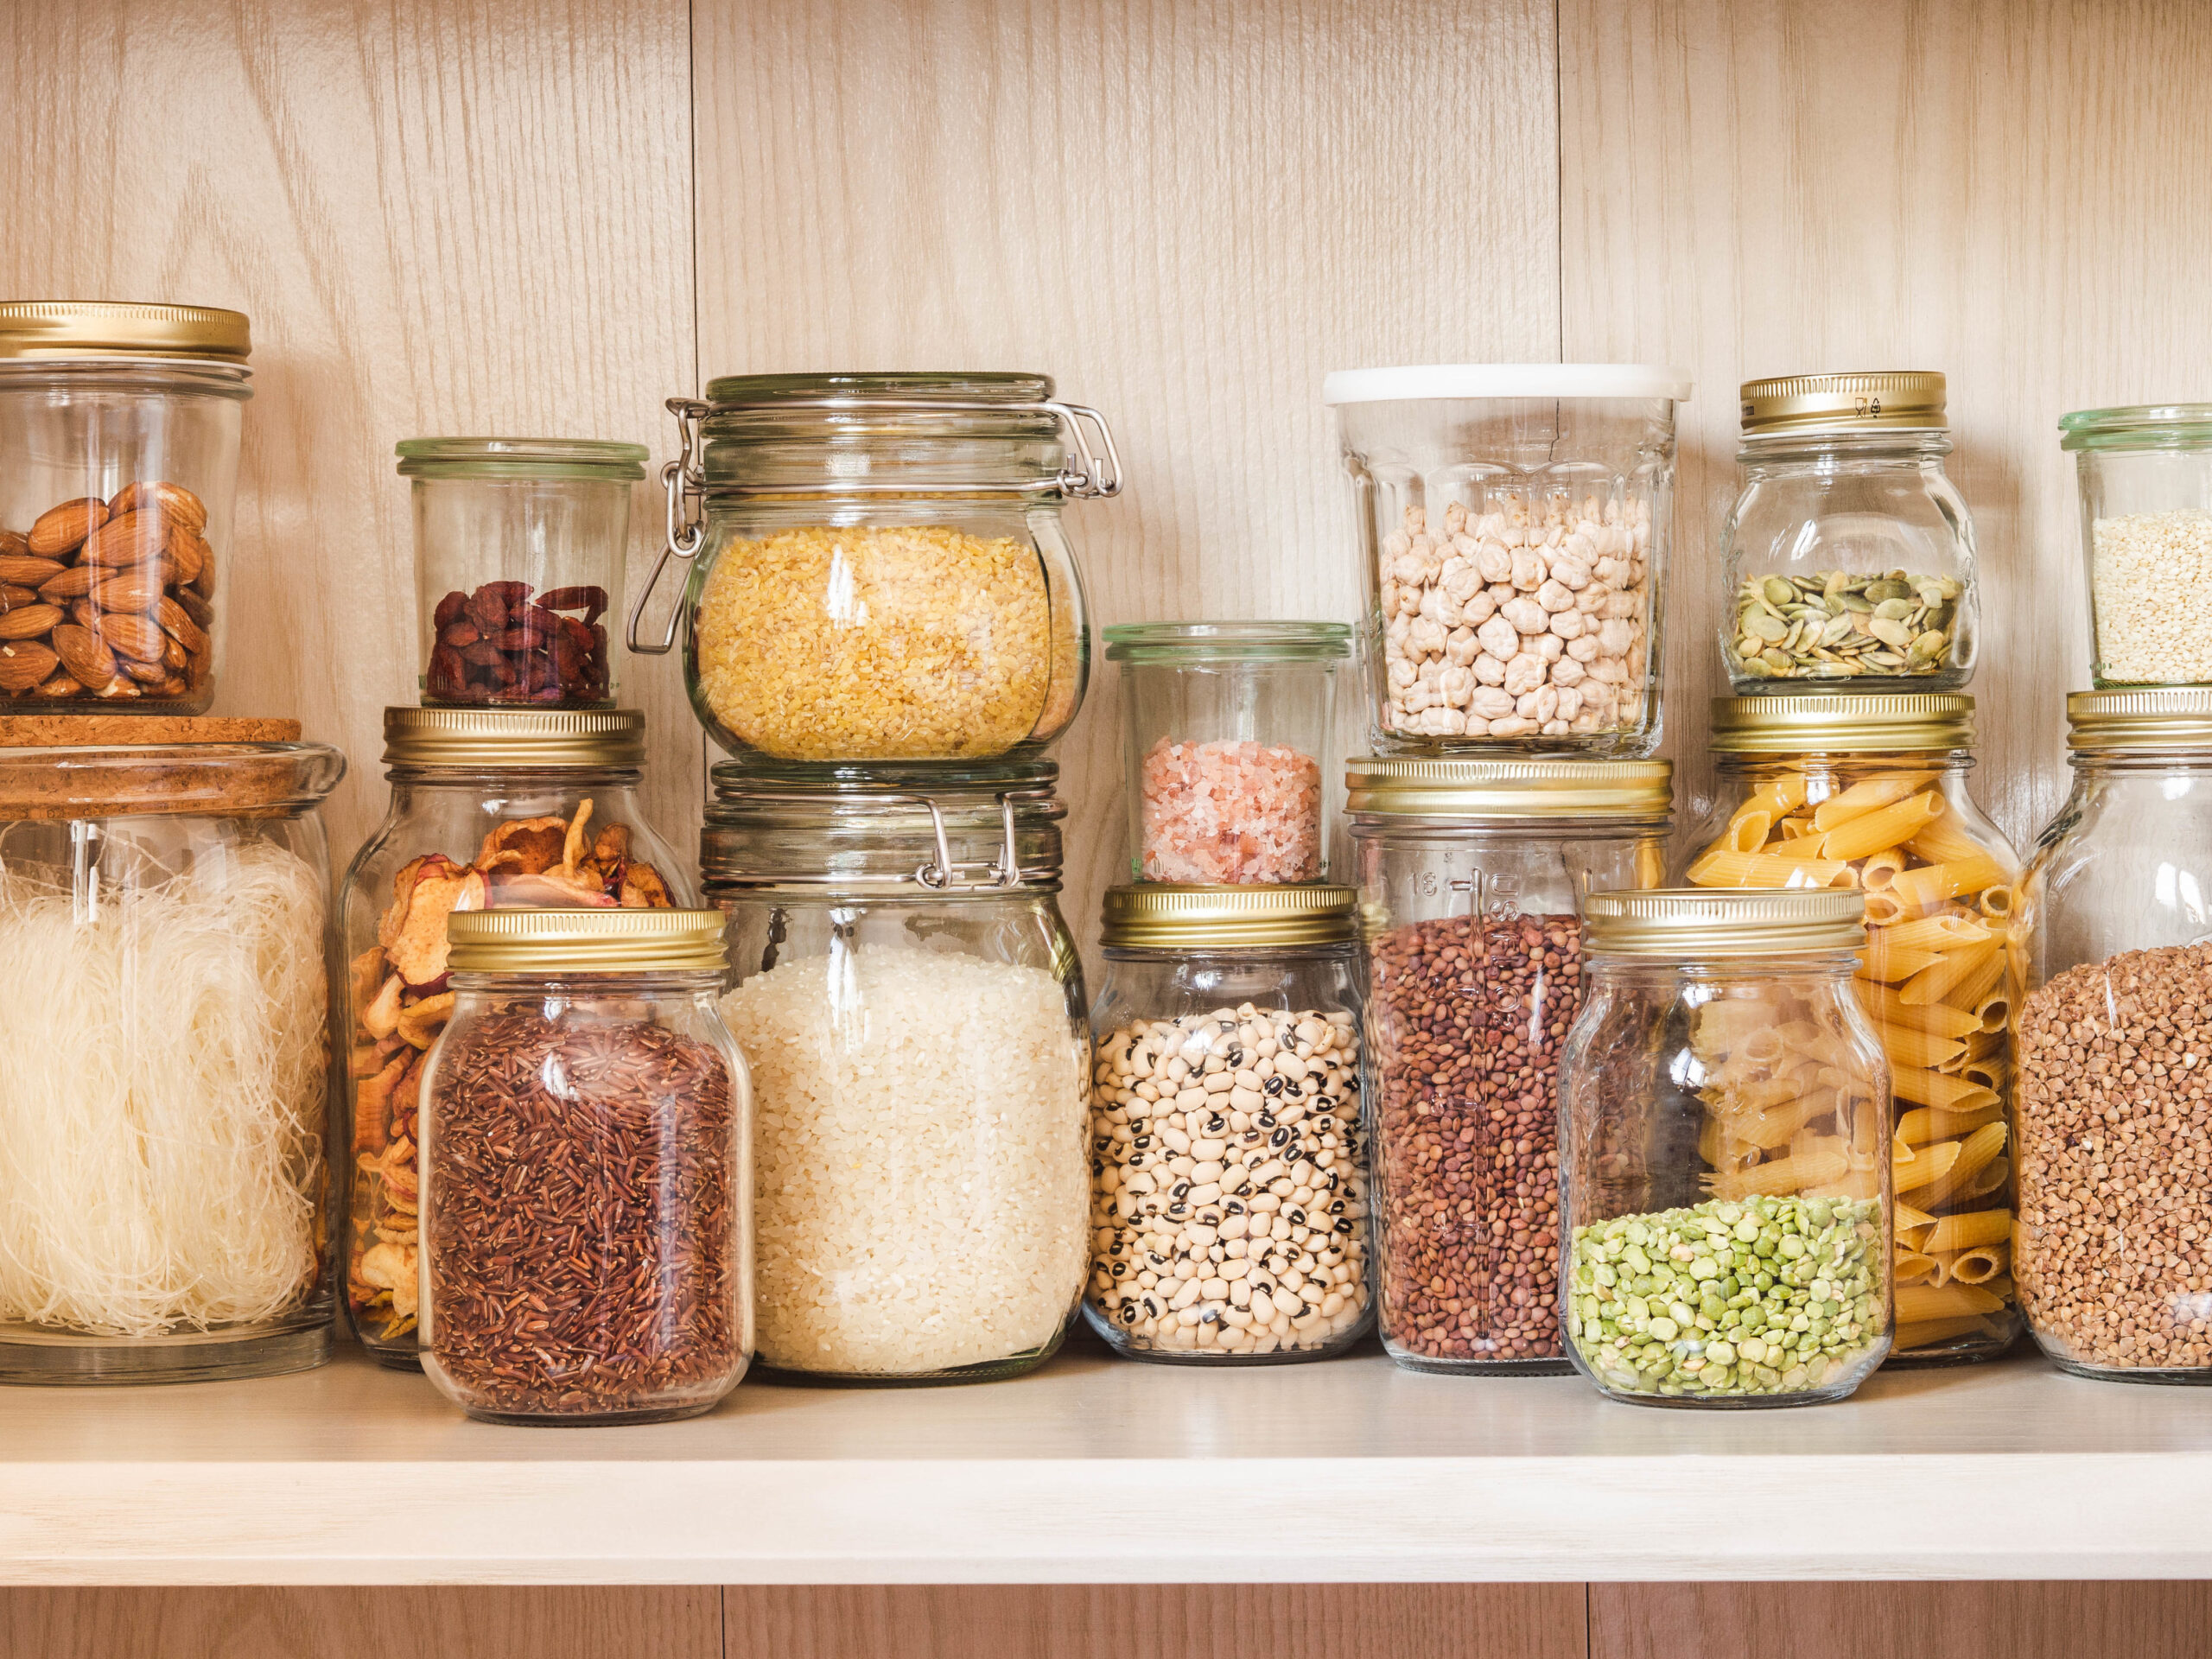 grocery shop pantry staples on shelf